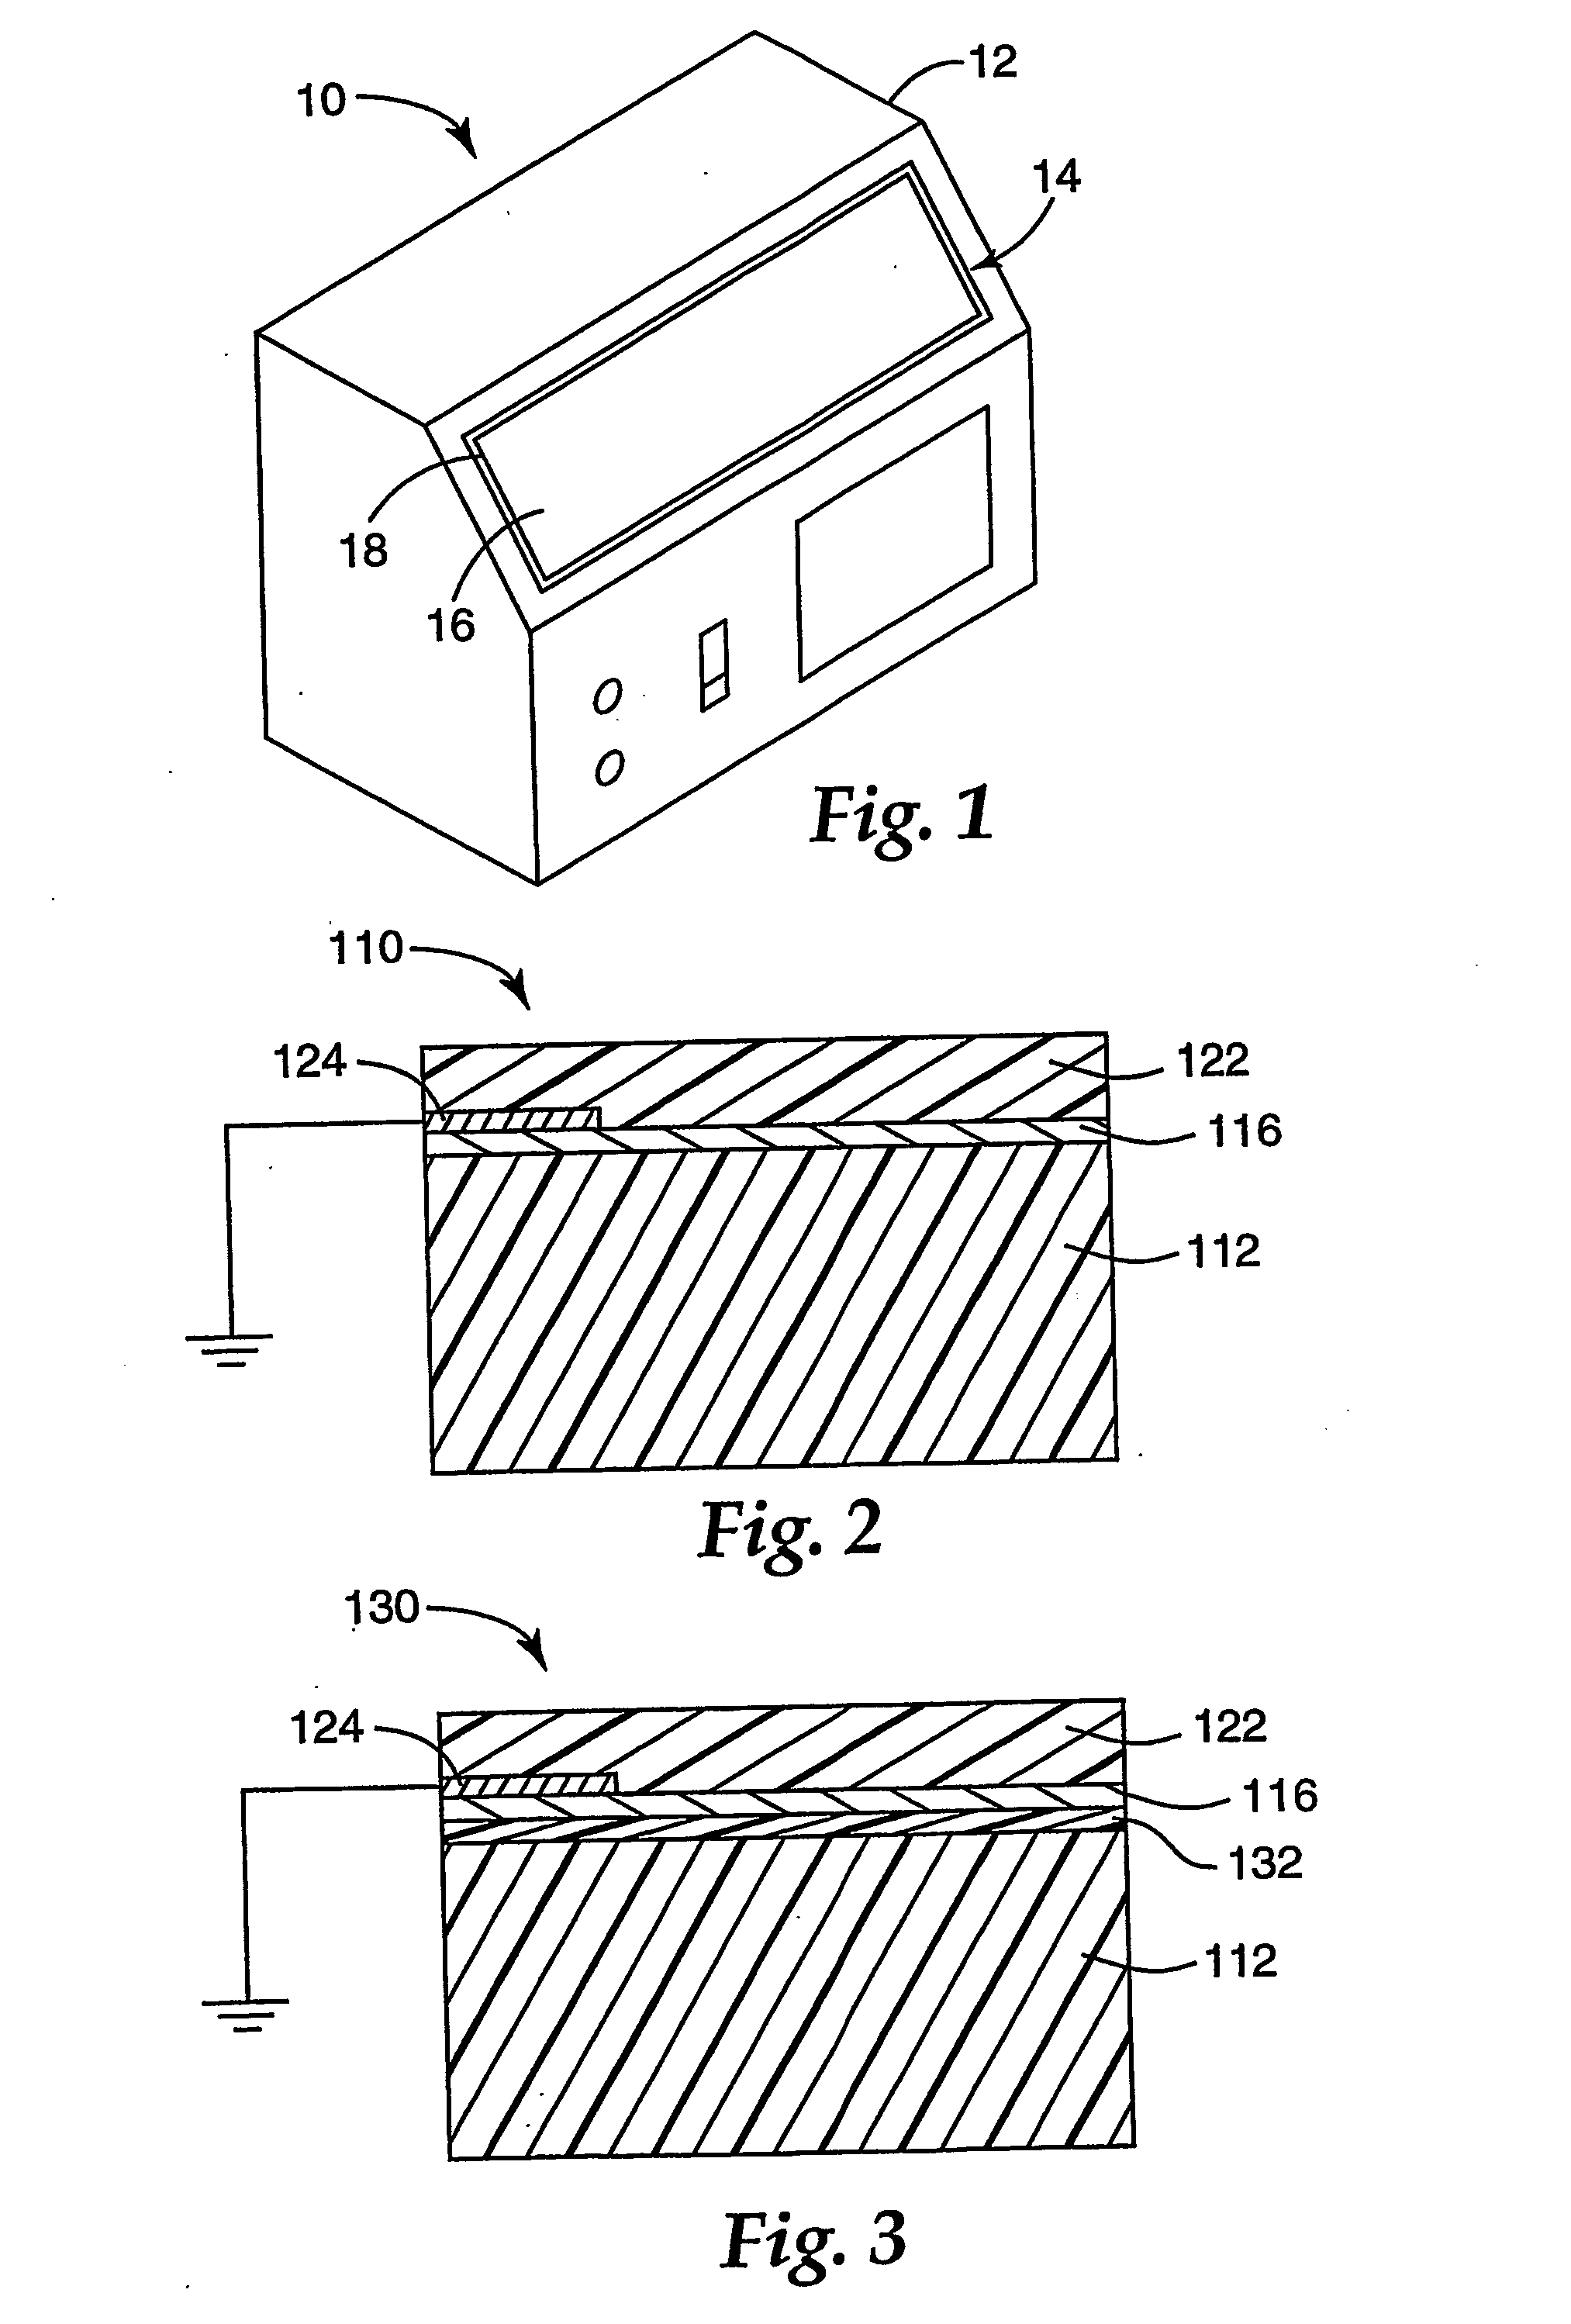 Flexible, formable conductive films